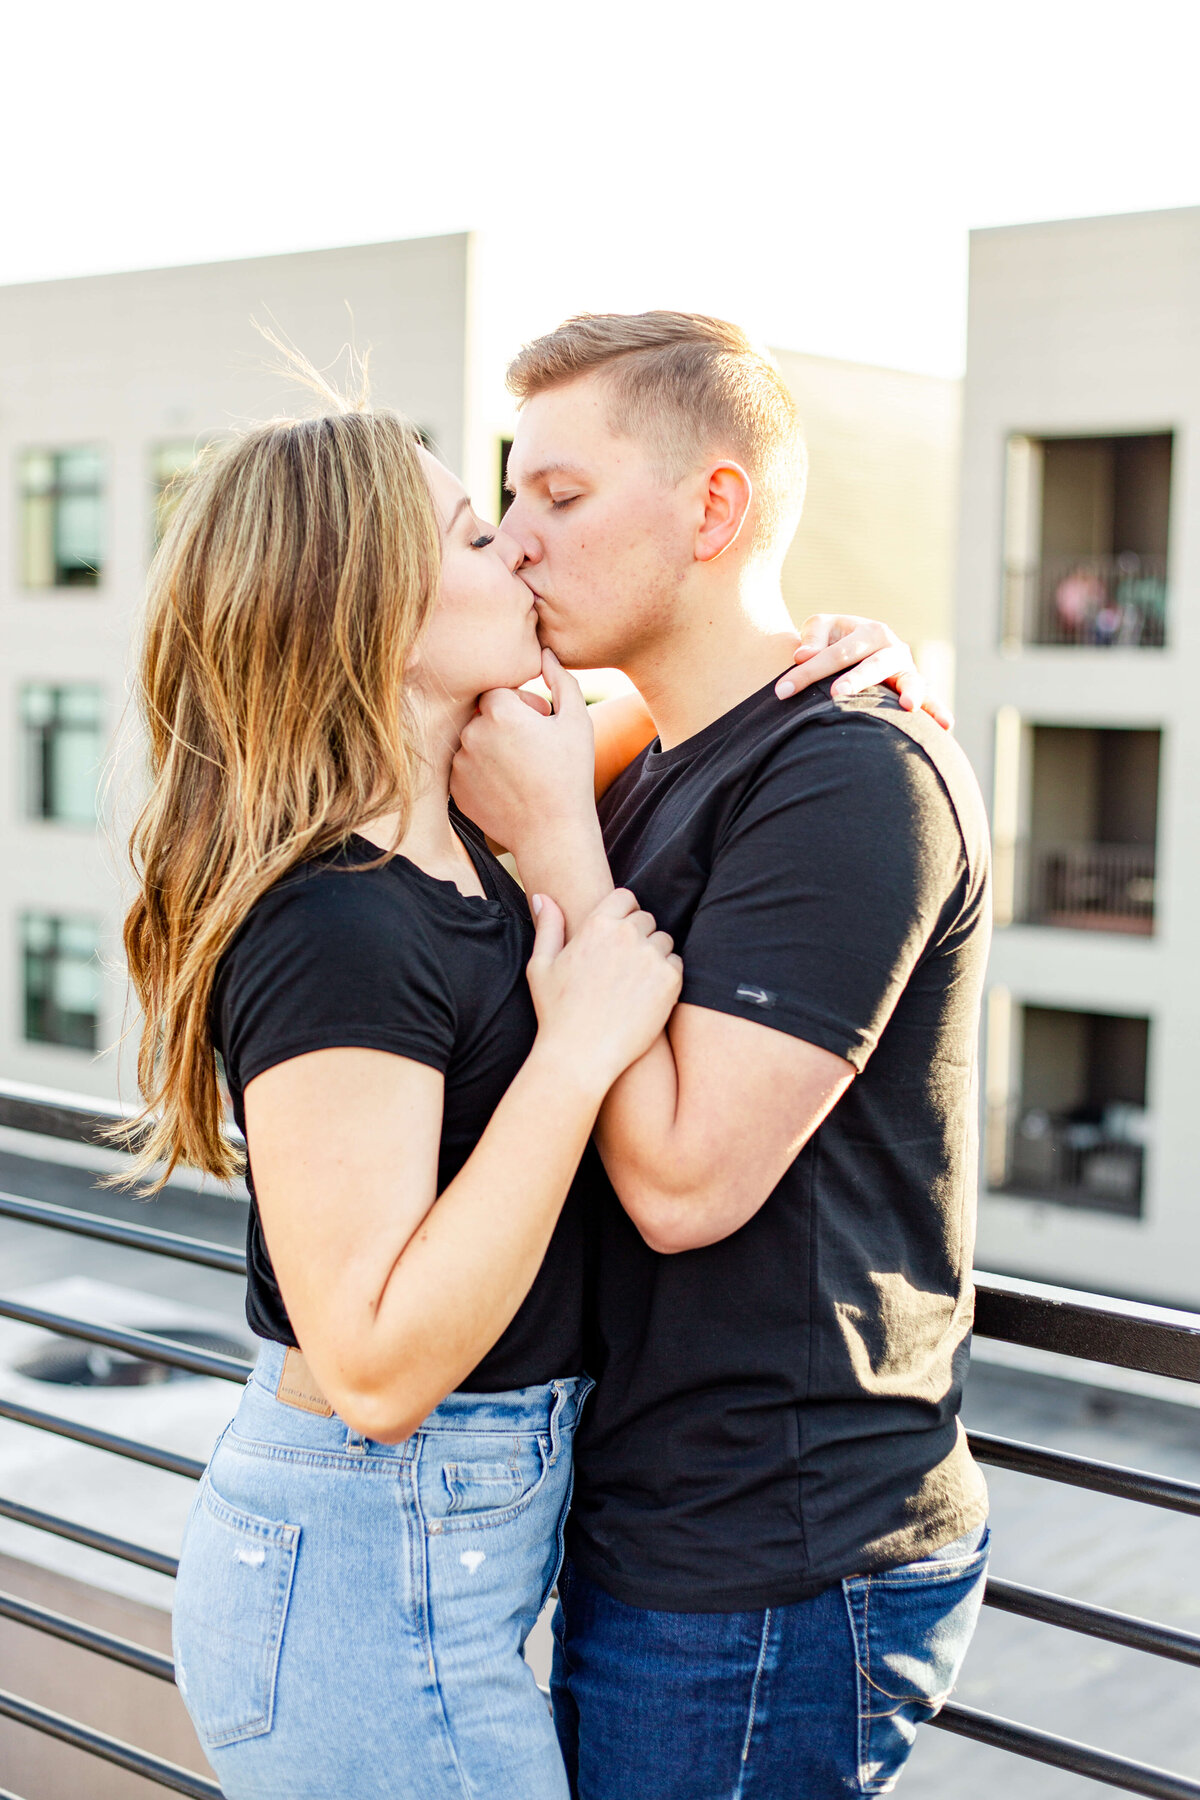 Rooftop-Engagement-Photo-Inspiration-in-Midwest-Bethany-Lane-Photography-2